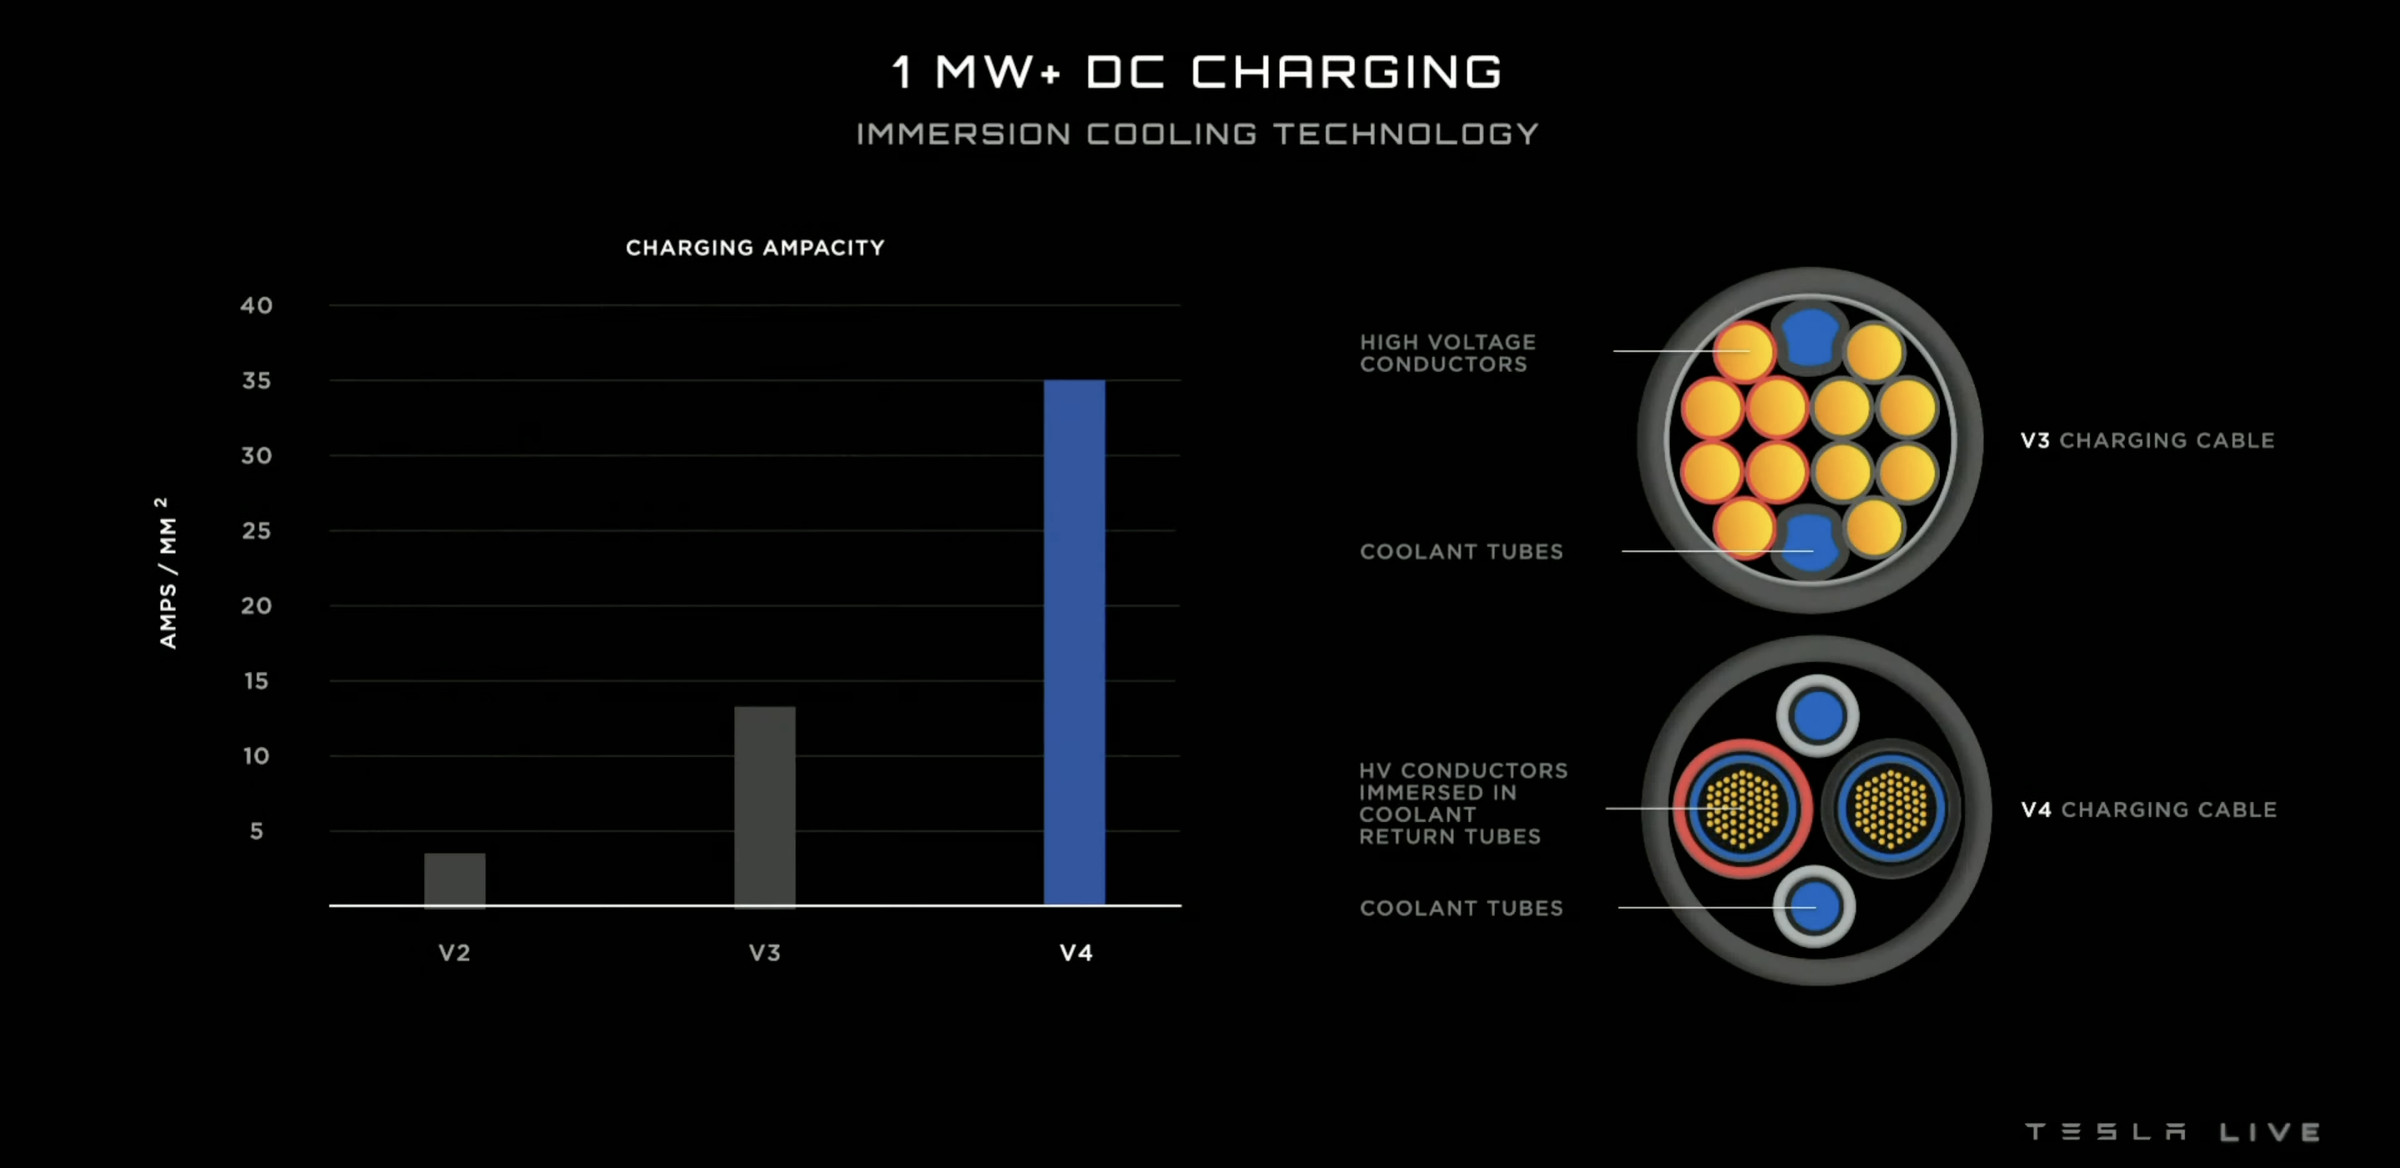 Slide showing a graph of the charging power of Tesla's V4 charging cable, which reaches 35 amps per square millimeter, and showing how the conductors are immersed in the cooling tubes.